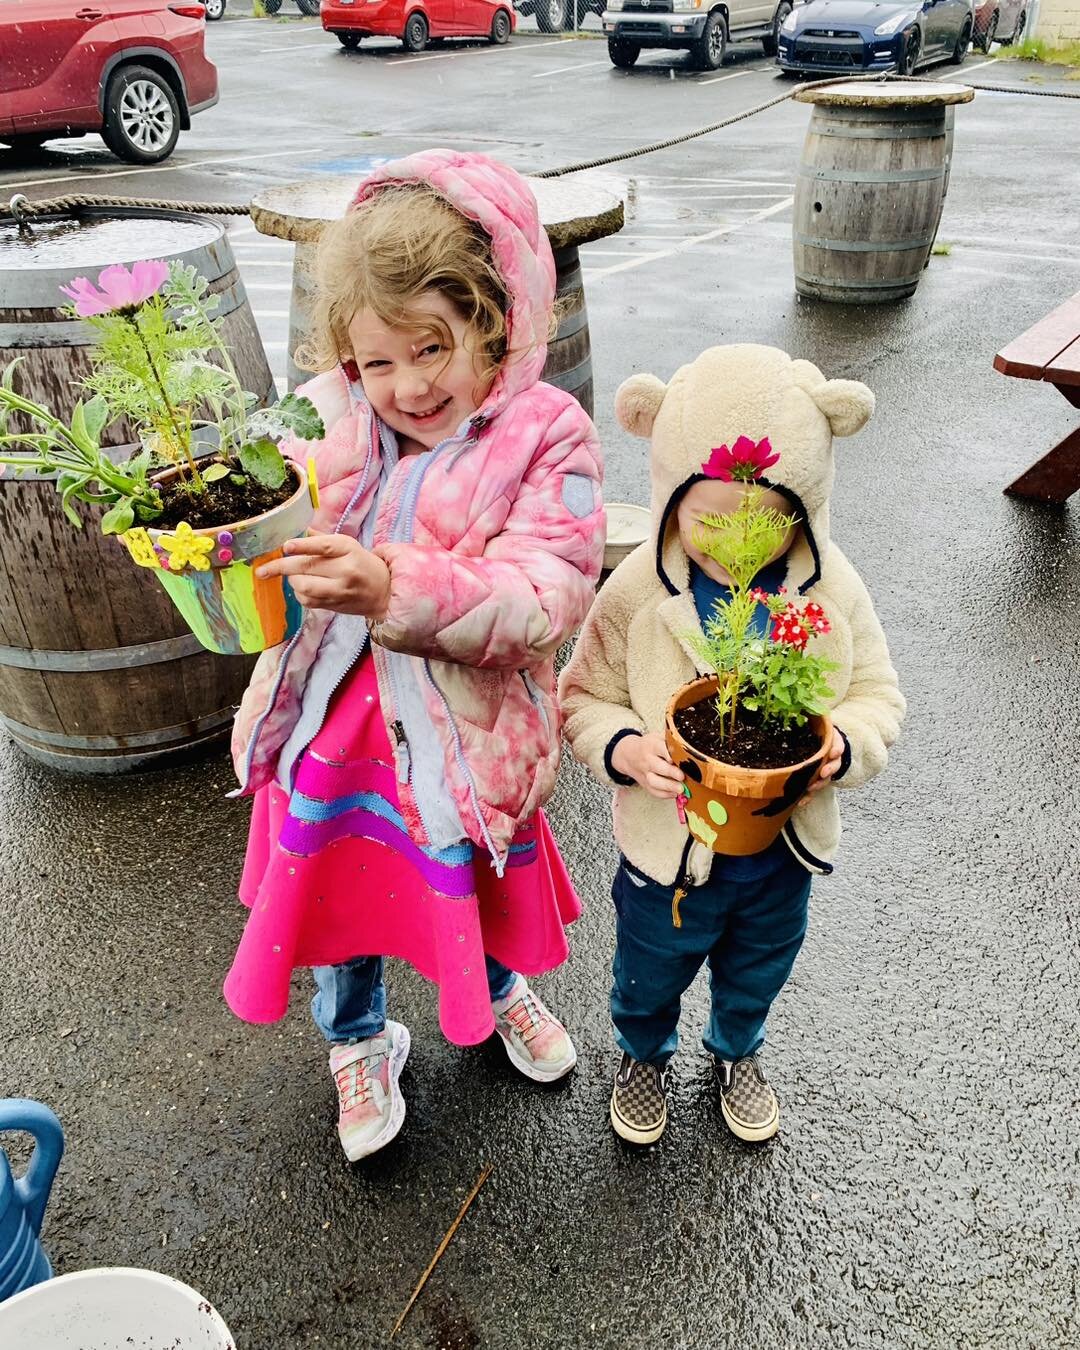 Don&rsquo;t forget about our Mother&rsquo;s Day workshop today! 
This is such a fun event for the whole family! 

Noon-3pm (or while supplies last)
$30 includes
1 pot
2 flowers
Soil
Paints and supplies to decorate your pot
1 Beer, cider, or seltzer
1